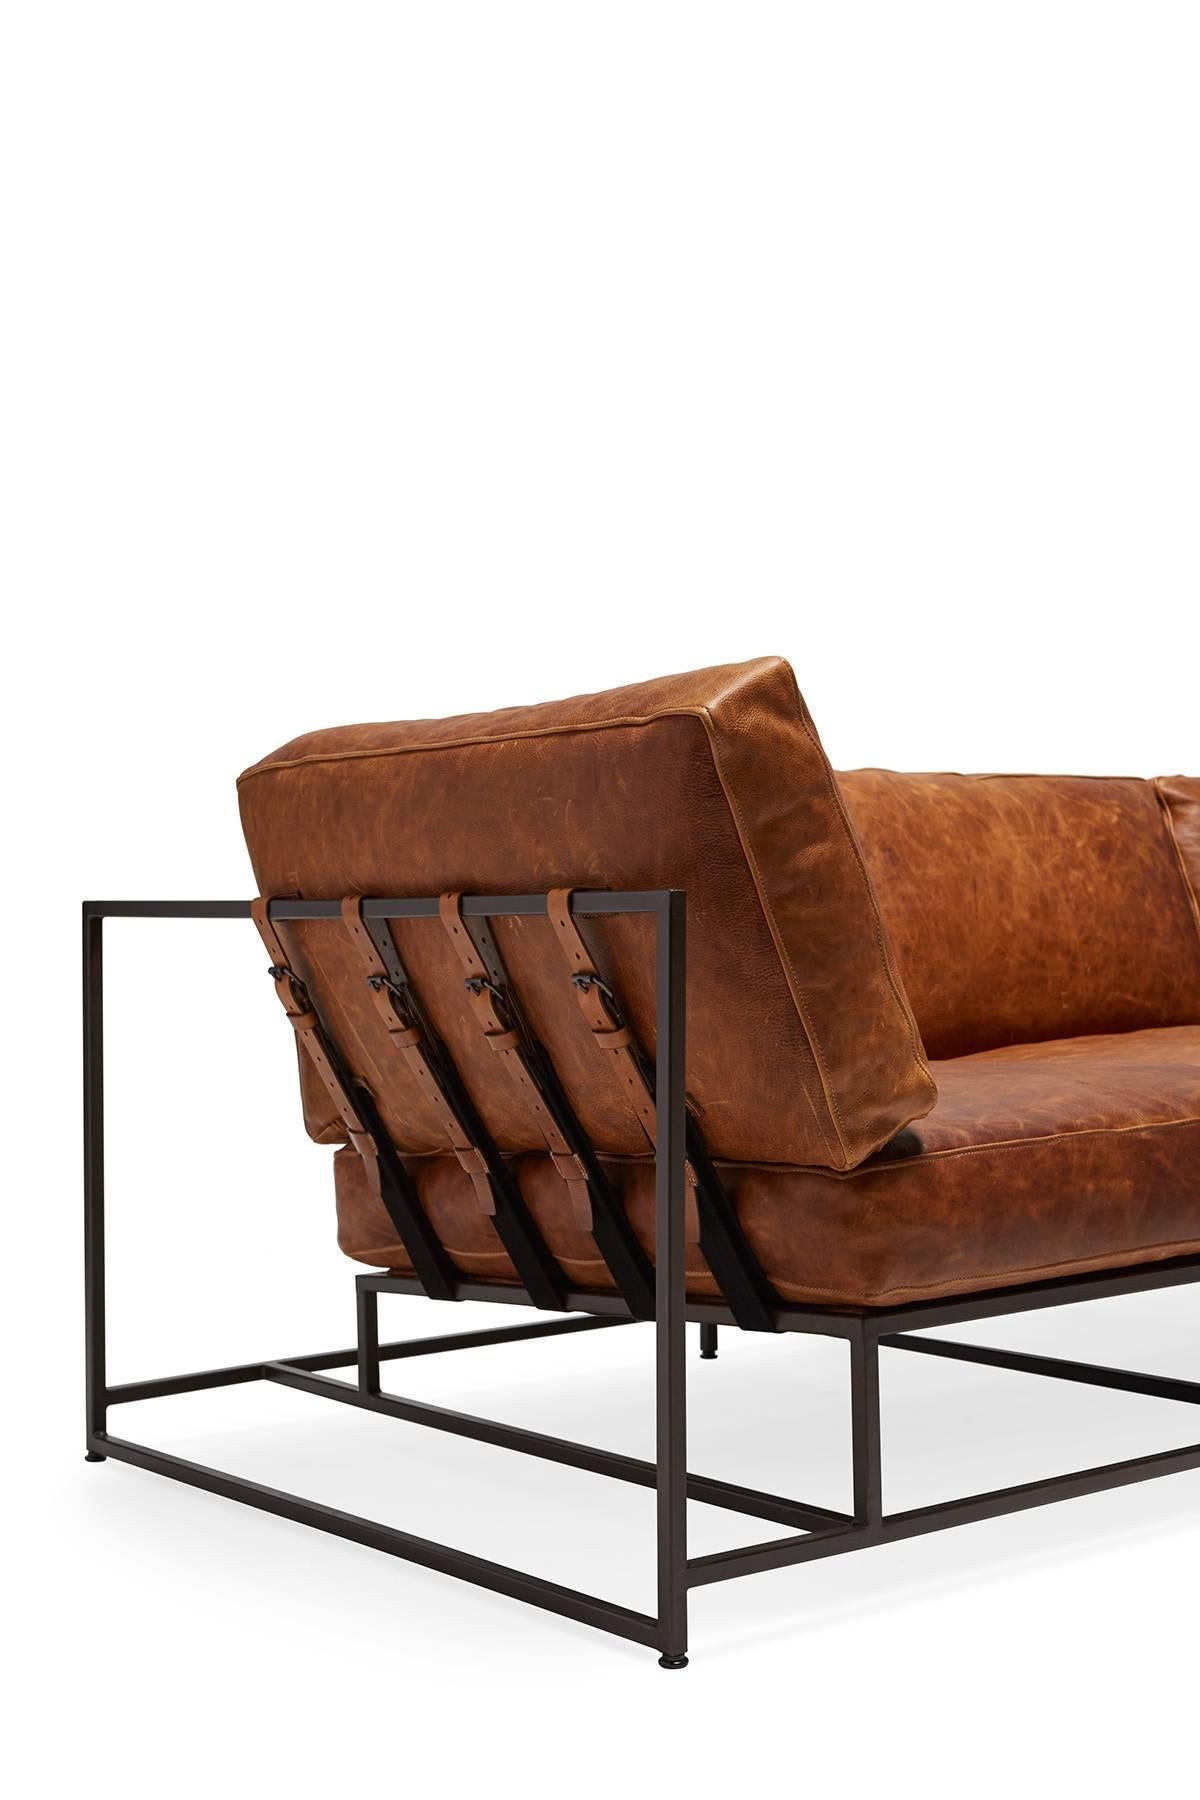 cognac brown leather couch